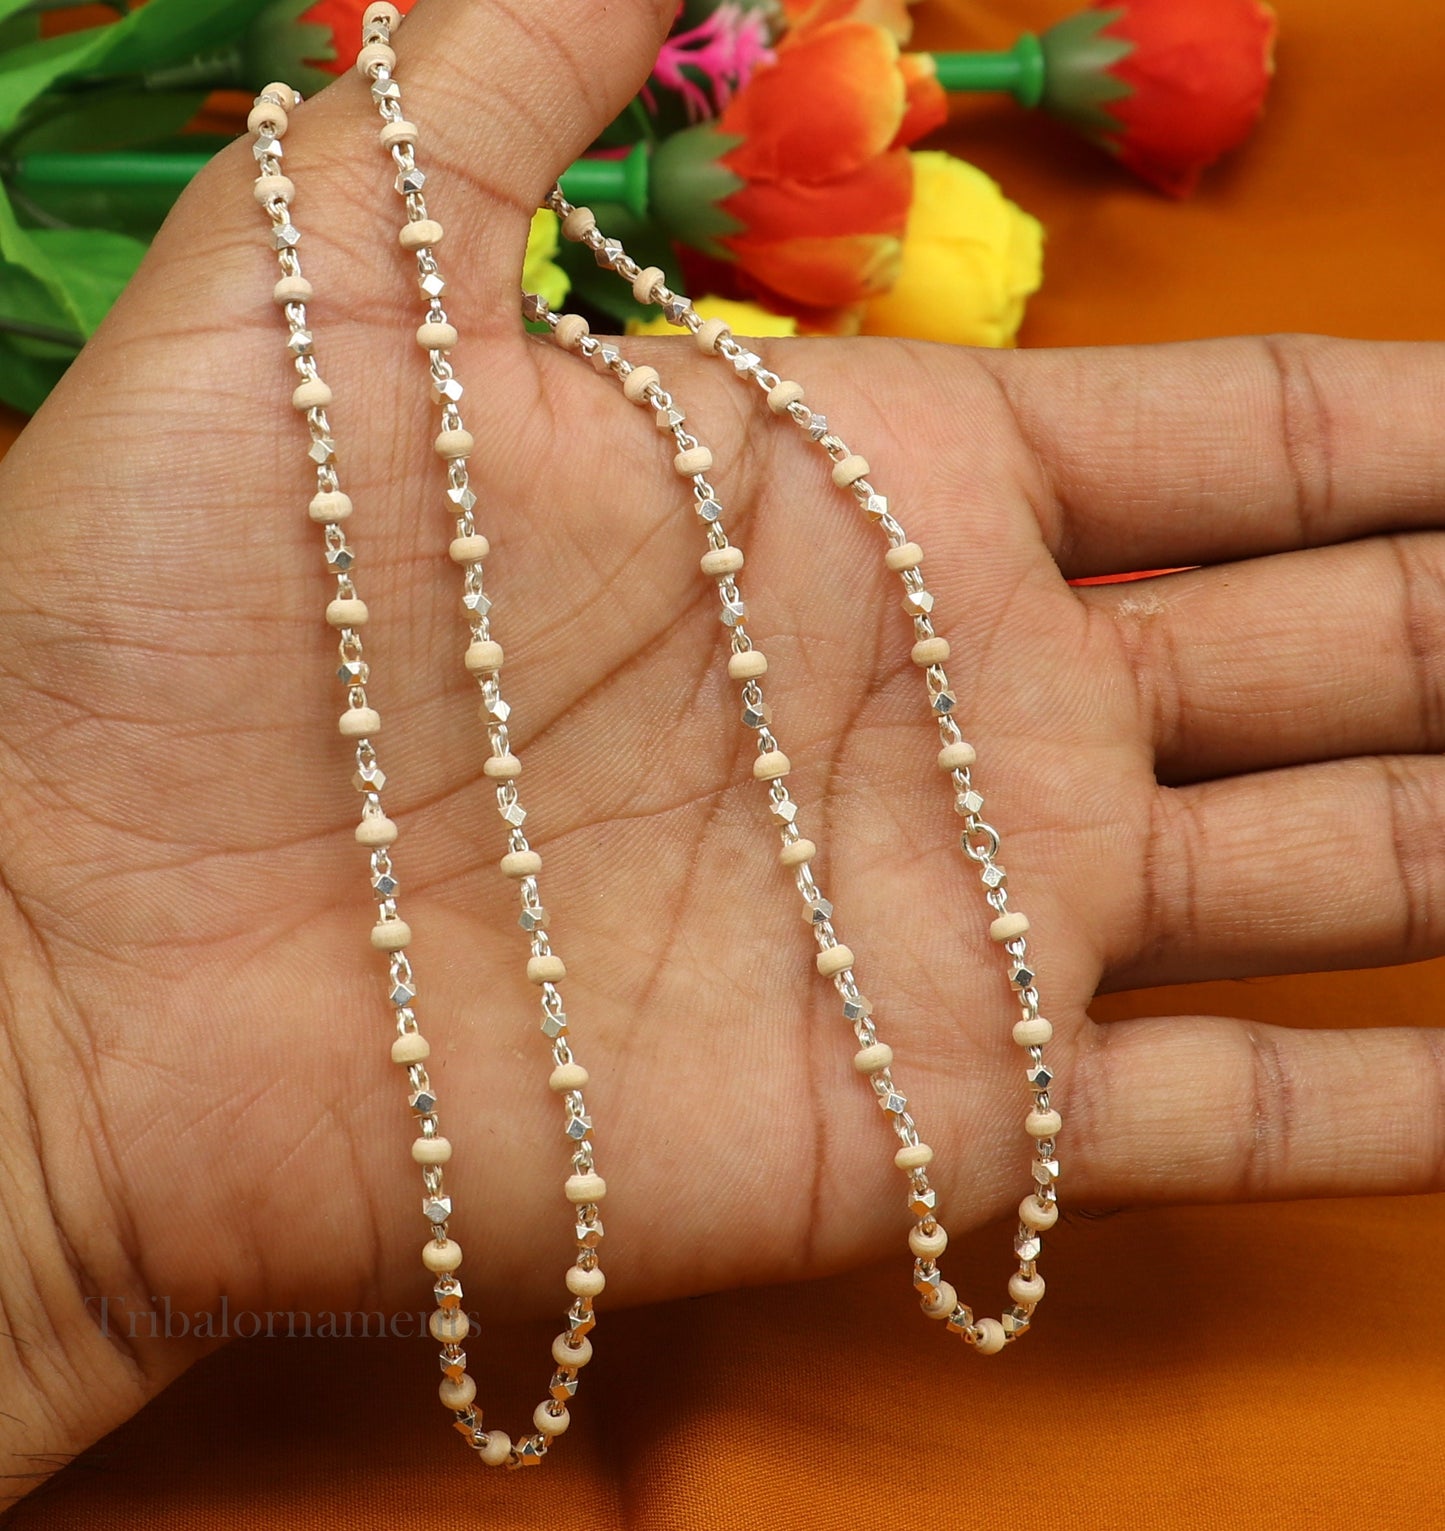 24" Sterling silver handmade wooden beads Holy basil rosary beads silver chain necklace unisex jewelry , tulsi mala customized necklace ch - TRIBAL ORNAMENTS